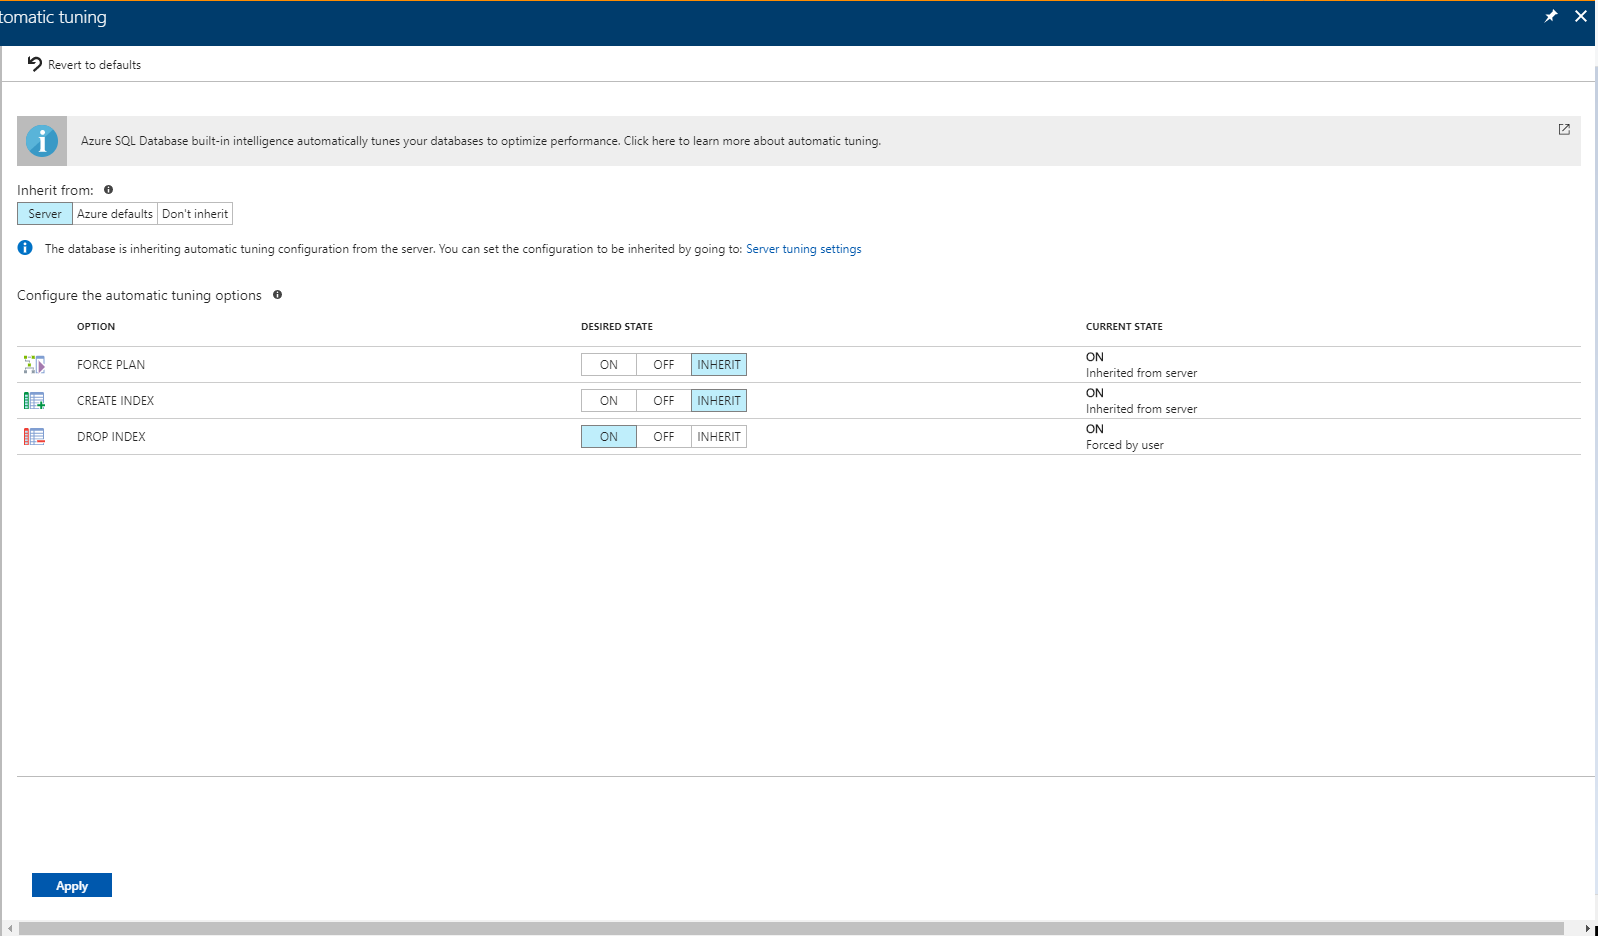 Screenshot shows Automatic tuning in the Azure portal, where you can apply options for a single database.